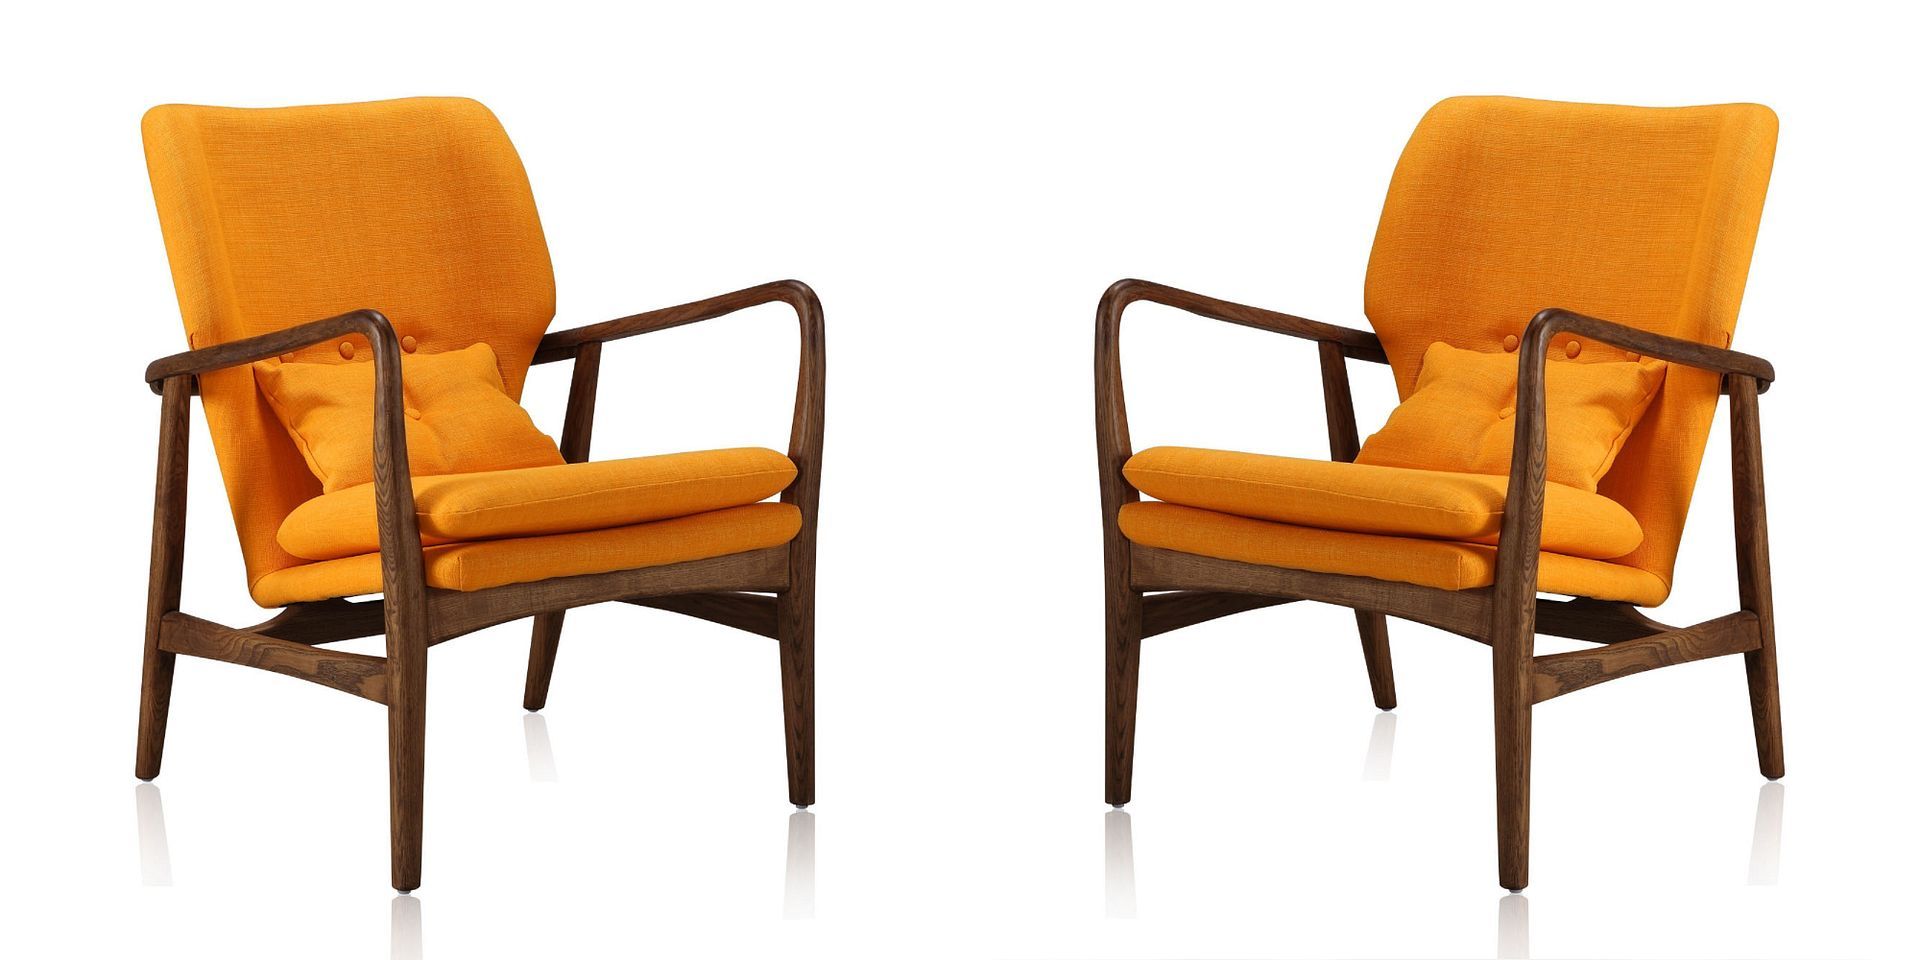 Bradley Accent Chair Set of 2